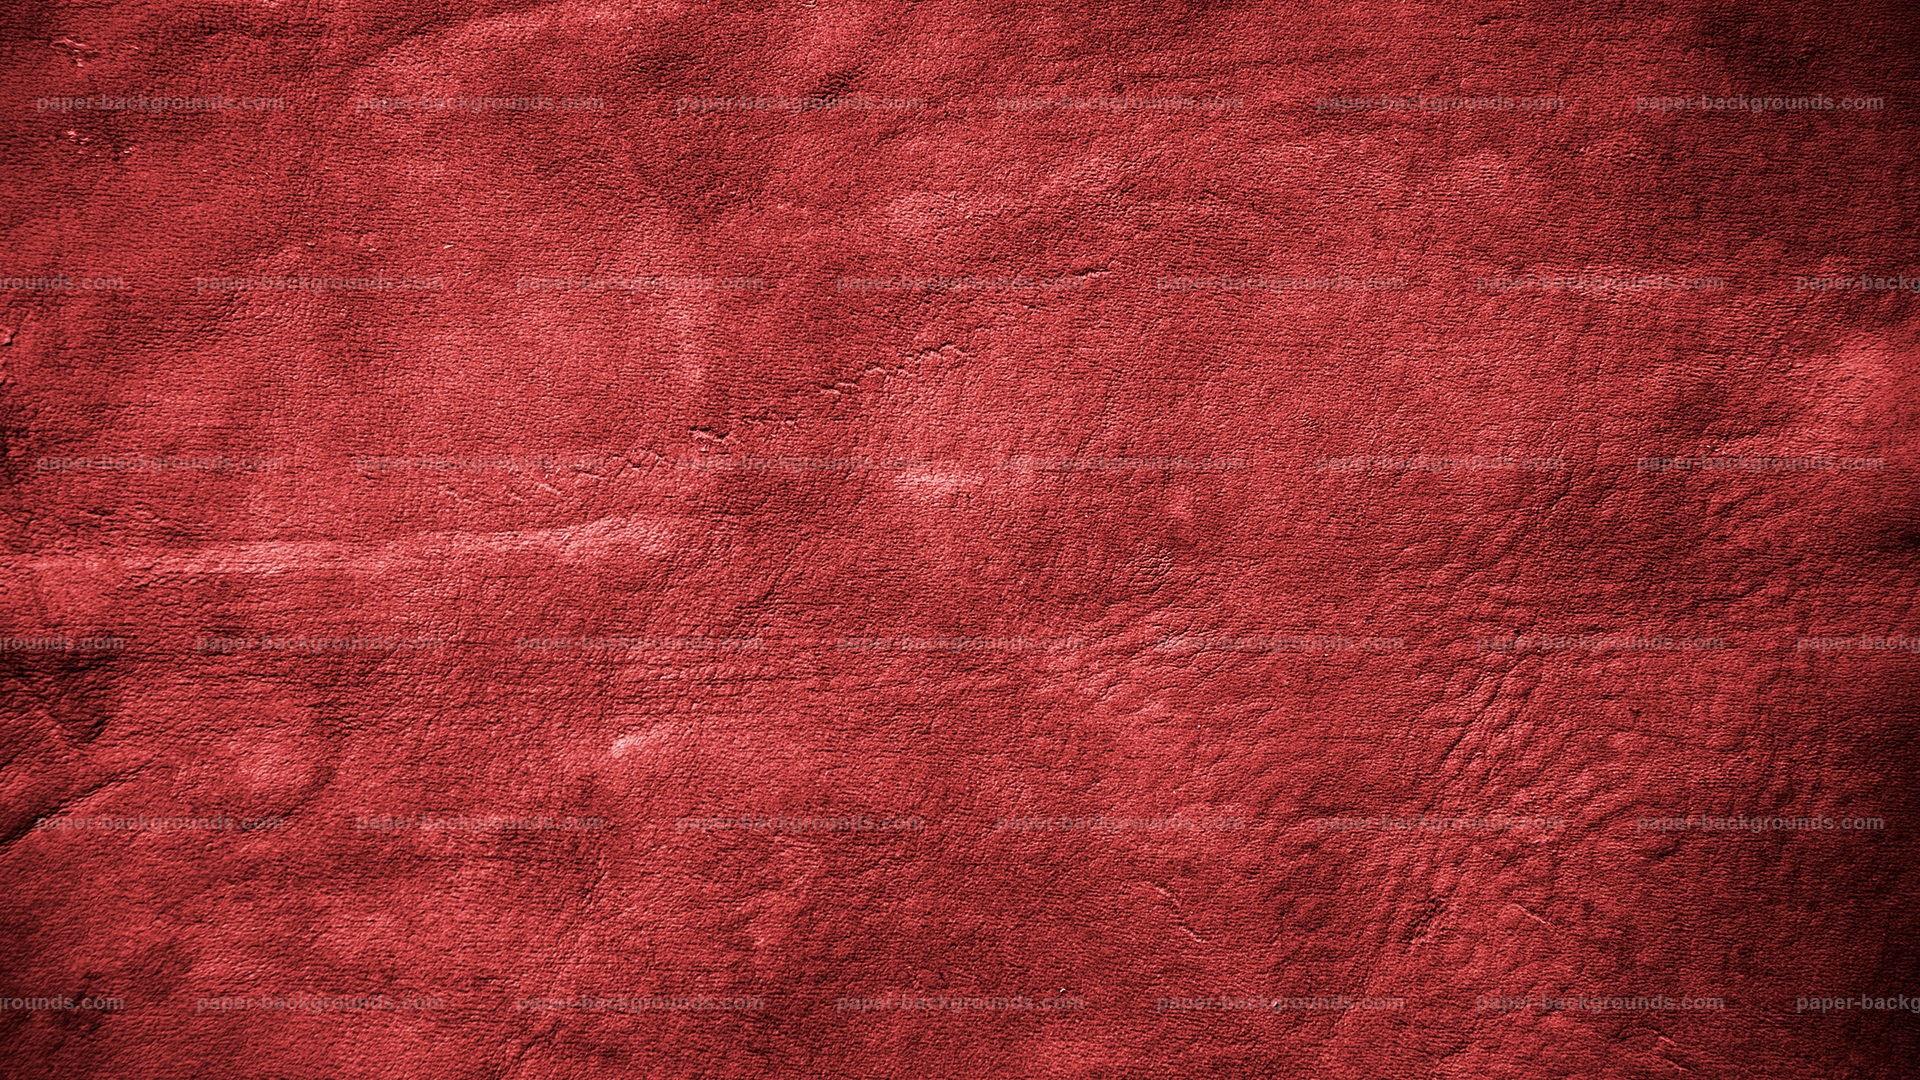 Vintage Red Soft Leather Texture Background HD X 1080p